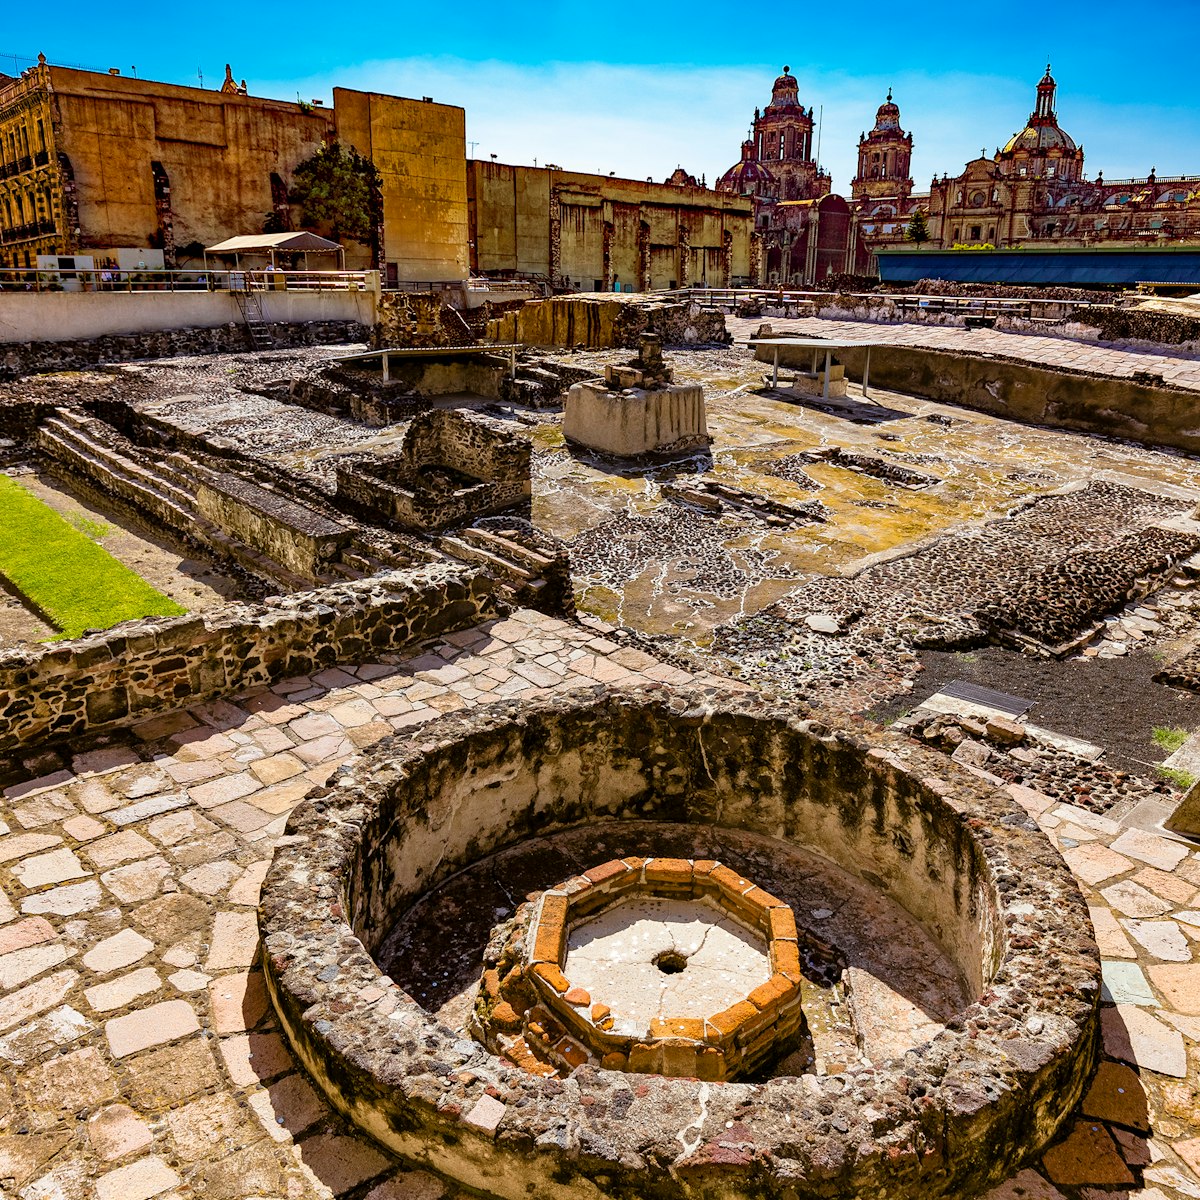 The ruins of the Templo Mayor in Mexico City.